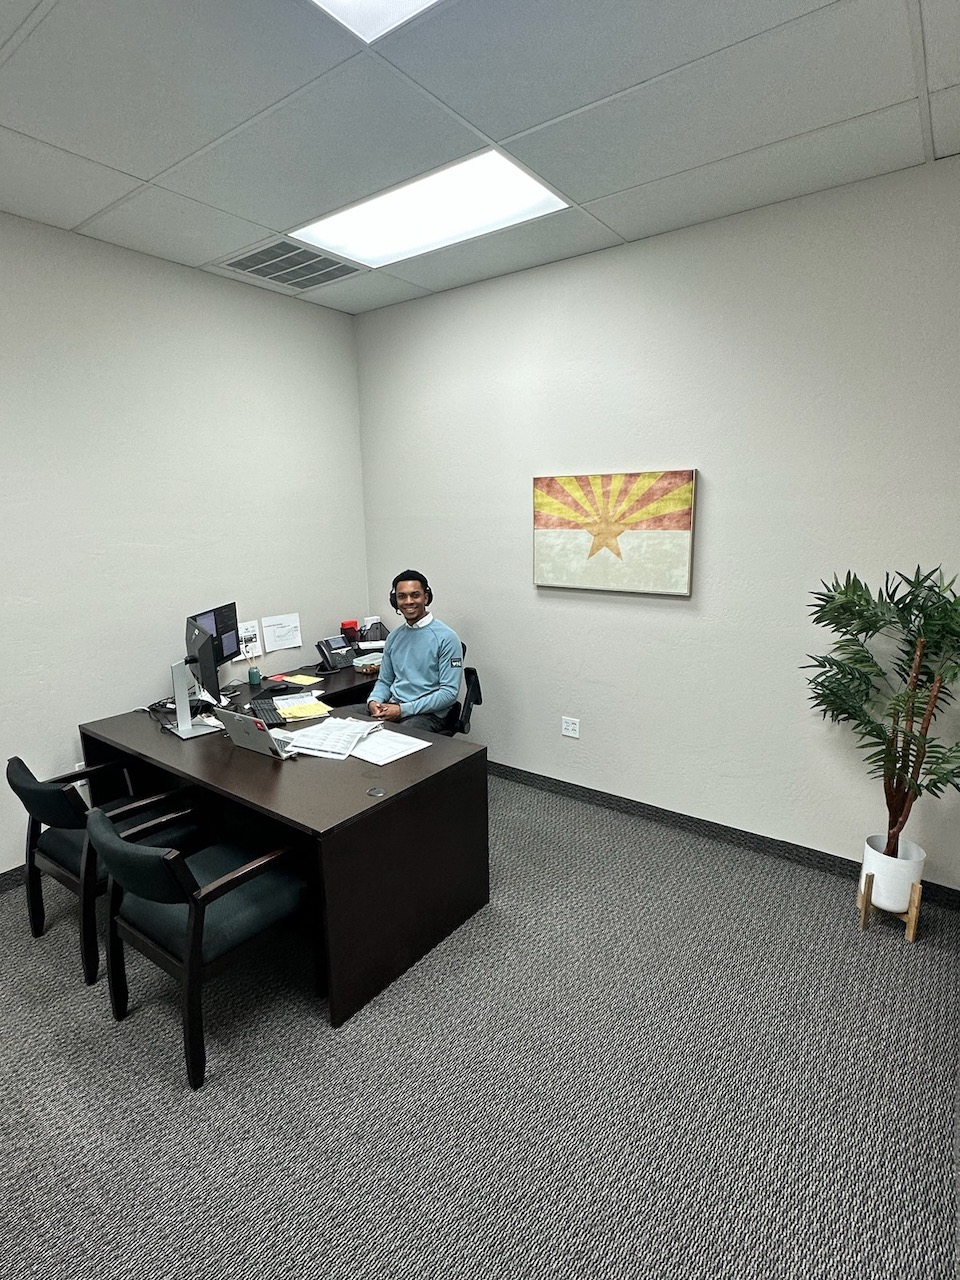 Come check out our new office building! Vahn Bozoian - State Farm Insurance Agent Phoenix (480)648-2928